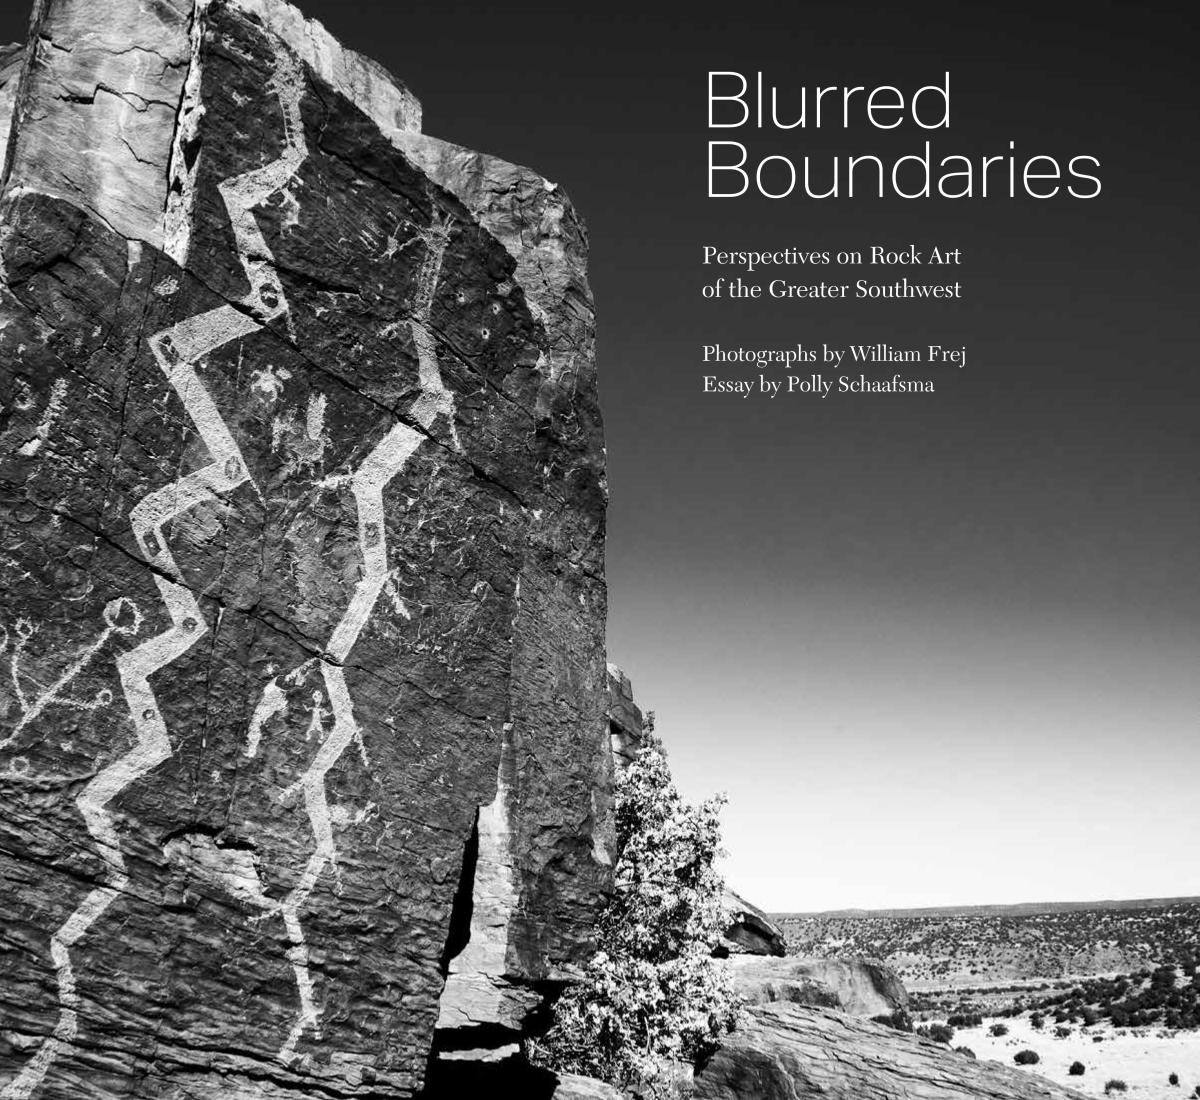 Blurred Boundaries: Perspectives on Rock Art of the Greater Southwest